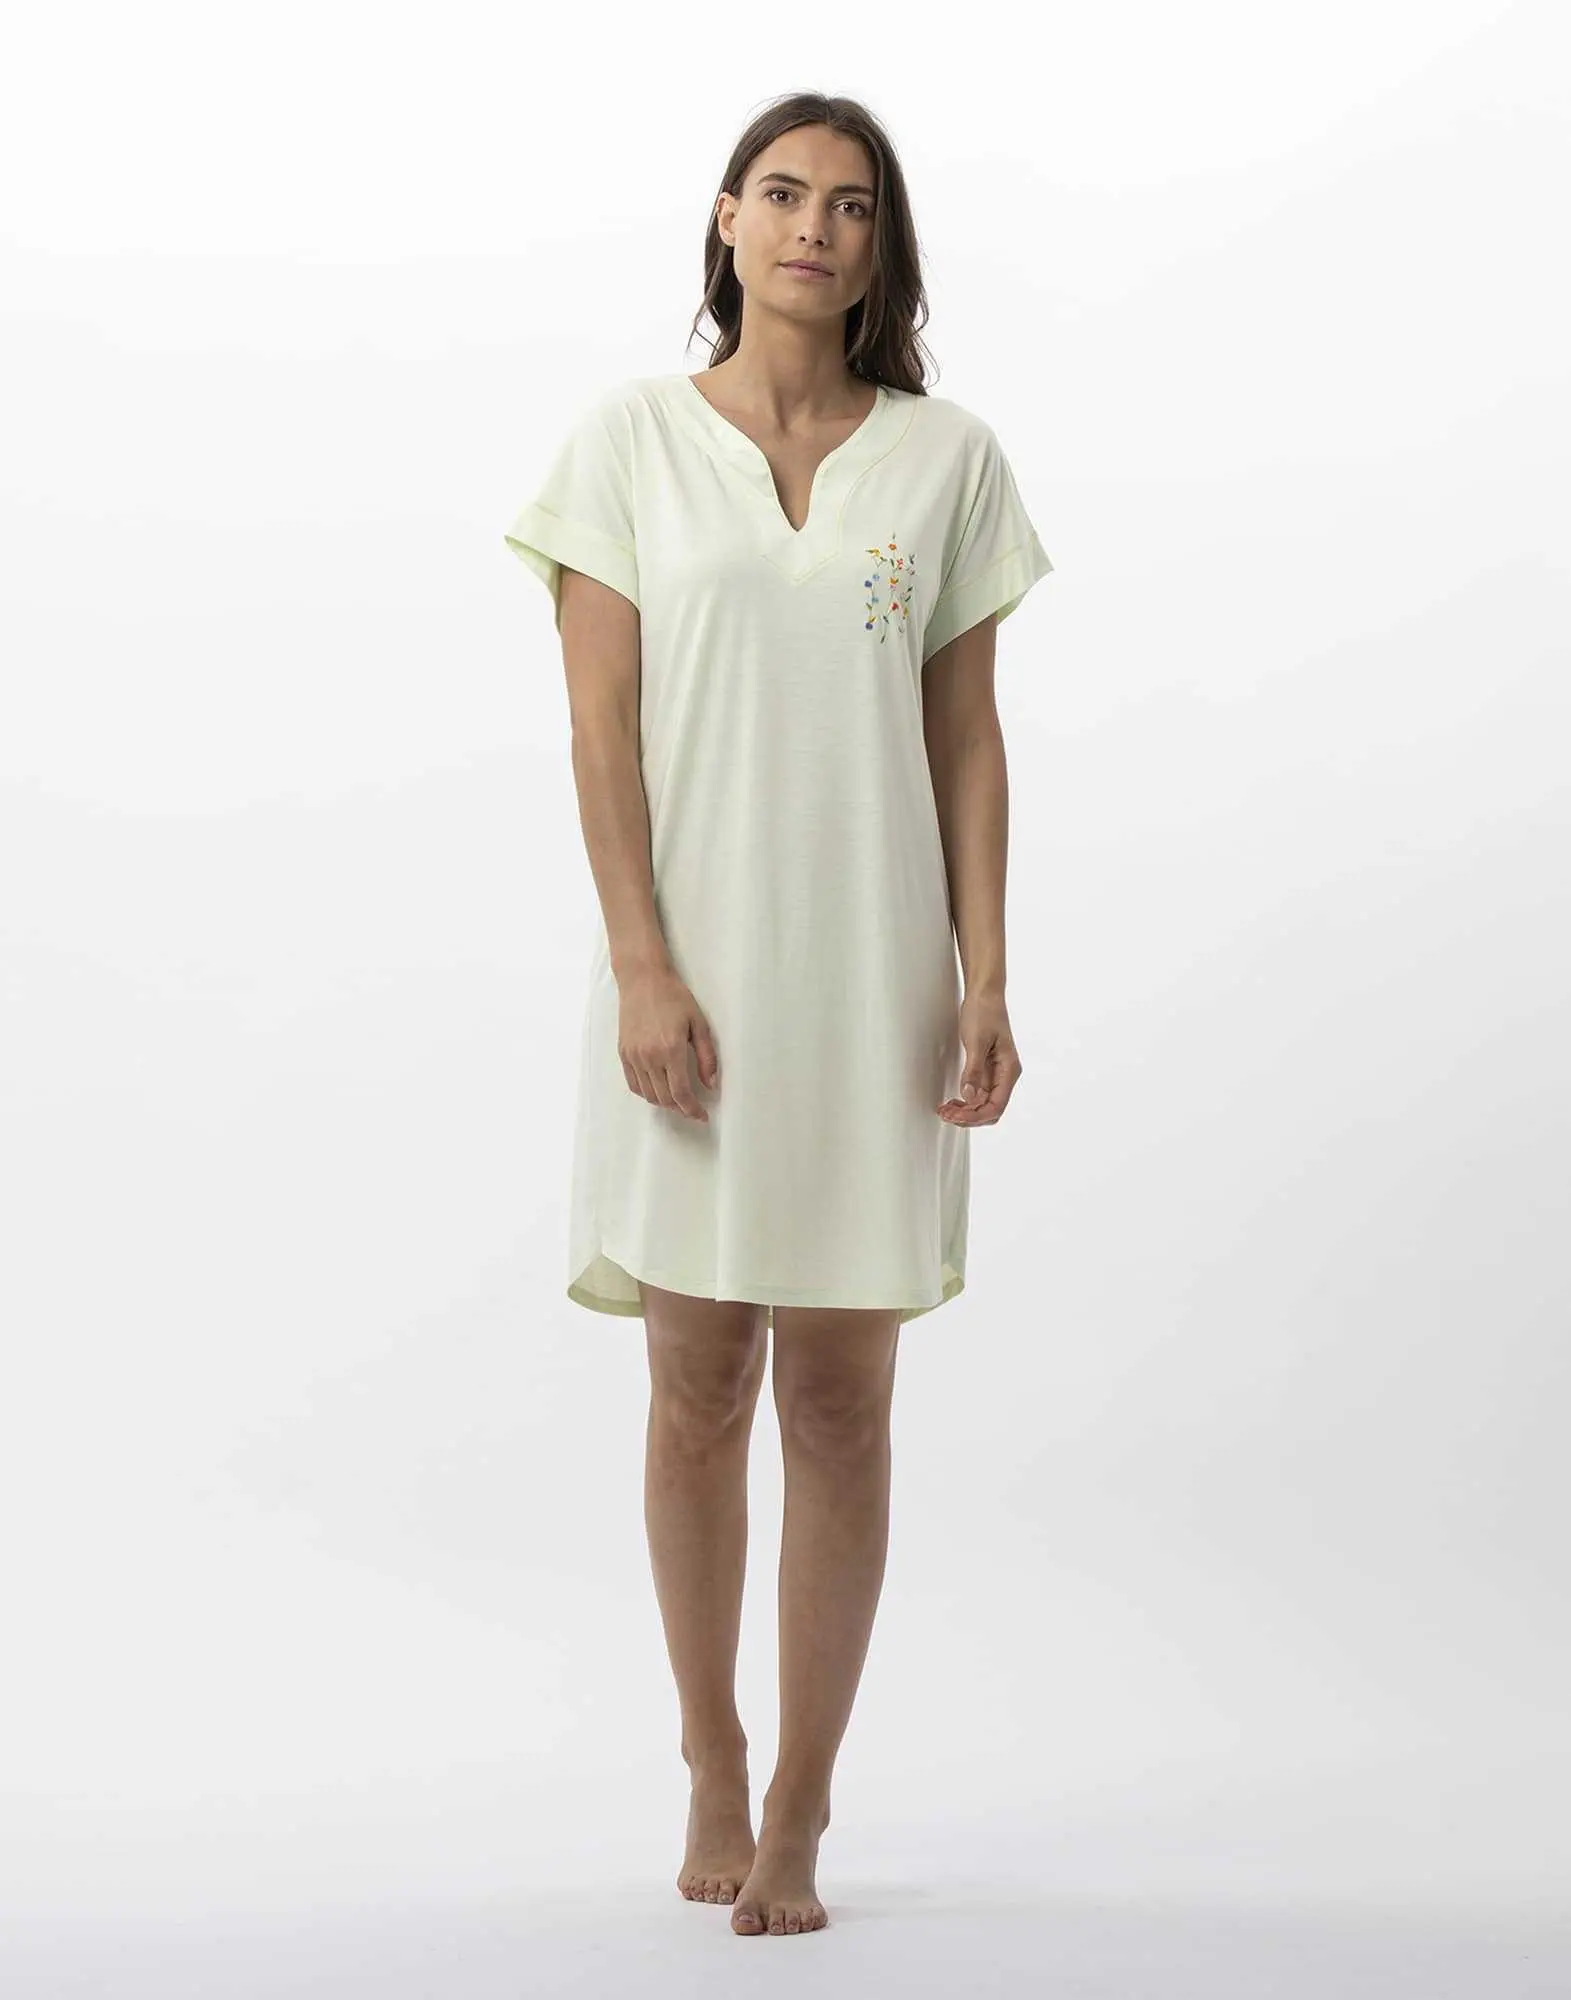 Nightdress in cotton modal RIVIERA 711 anise | Lingerie le Chat